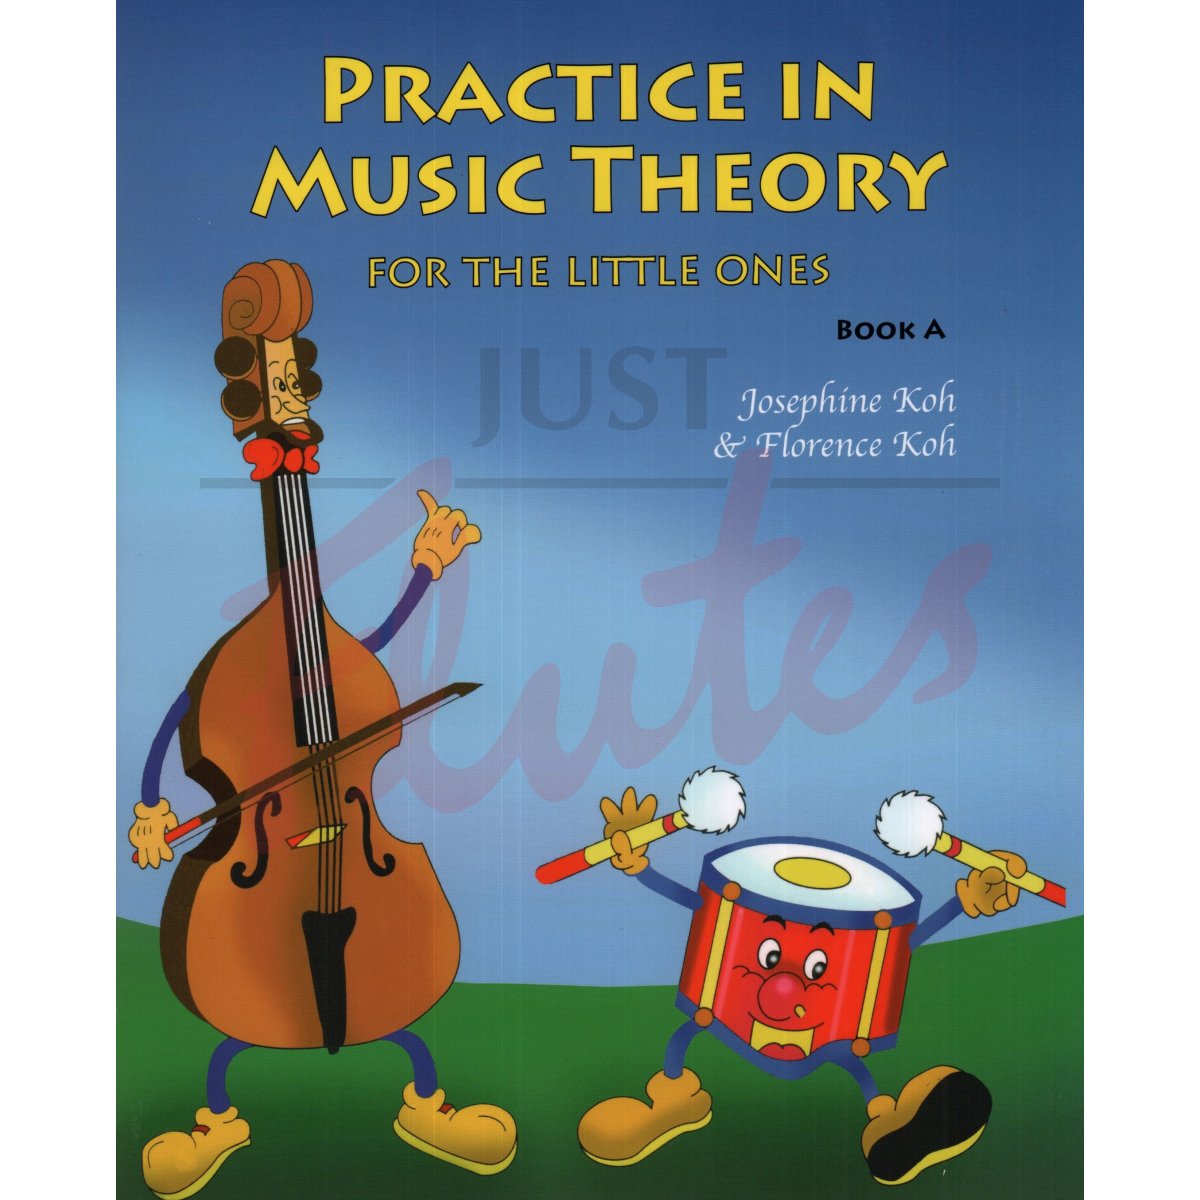 Practice in Music Theory for the Little Ones - Book A